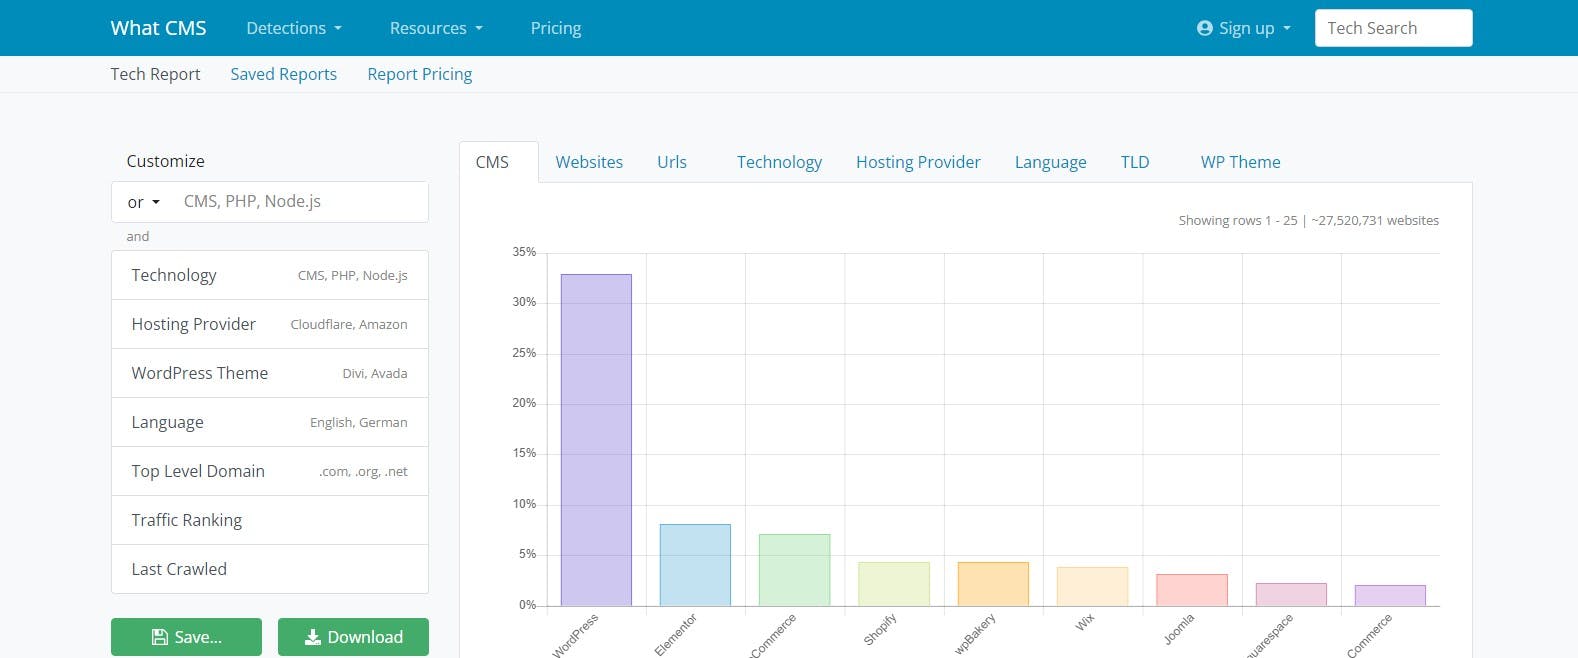 WhatCMS Tech Reports - In-depth analysis of CMS usage trends.